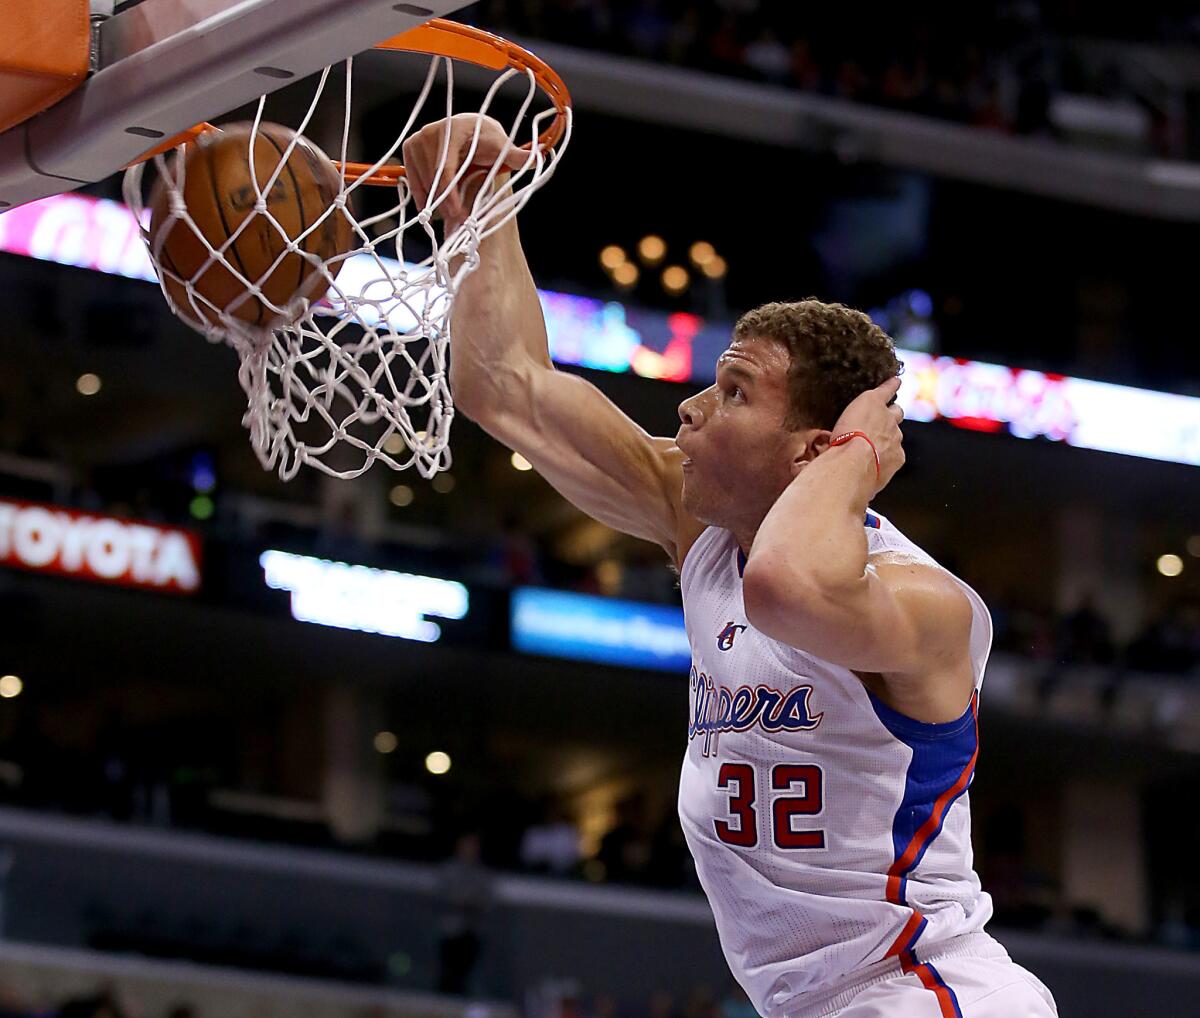 Clippers power forward Blake Griffin throws down a breakaway slam dunk against the Suns on March 10 at Staples Center.